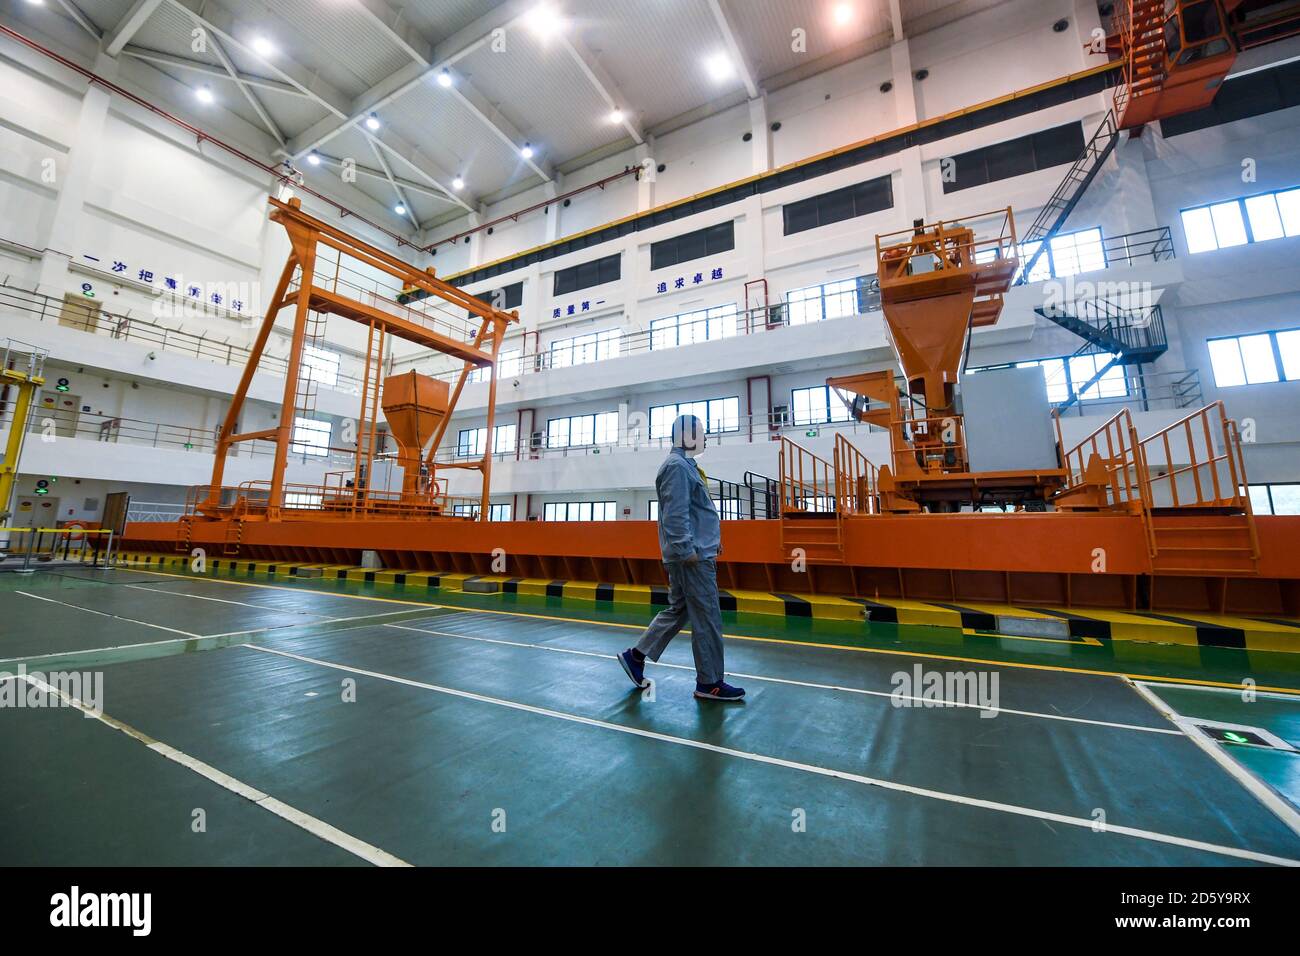 (201014) -- SHENZHEN, Oct. 14, 2020 (Xinhua) -- Qiao Sukai walks past a simulated refueling pool at a training center in Shenzhen, south China's Guangdong Province, April 12, 2019. Every 18 months, the Dayawan Nuclear Power Plant has to undergo a fuel assemblies replacement, which is one of the most important moments for the nuclear power plant. Dozens of engineers are divided into four shifts and operate the equipment day and night when the reactor is shut down. Their leader, Qiao Sukai, has been dealing with nuclear fuel since July 1993 when the nuclear fuel assembly of Dayawan Nuclear Power Stock Photo